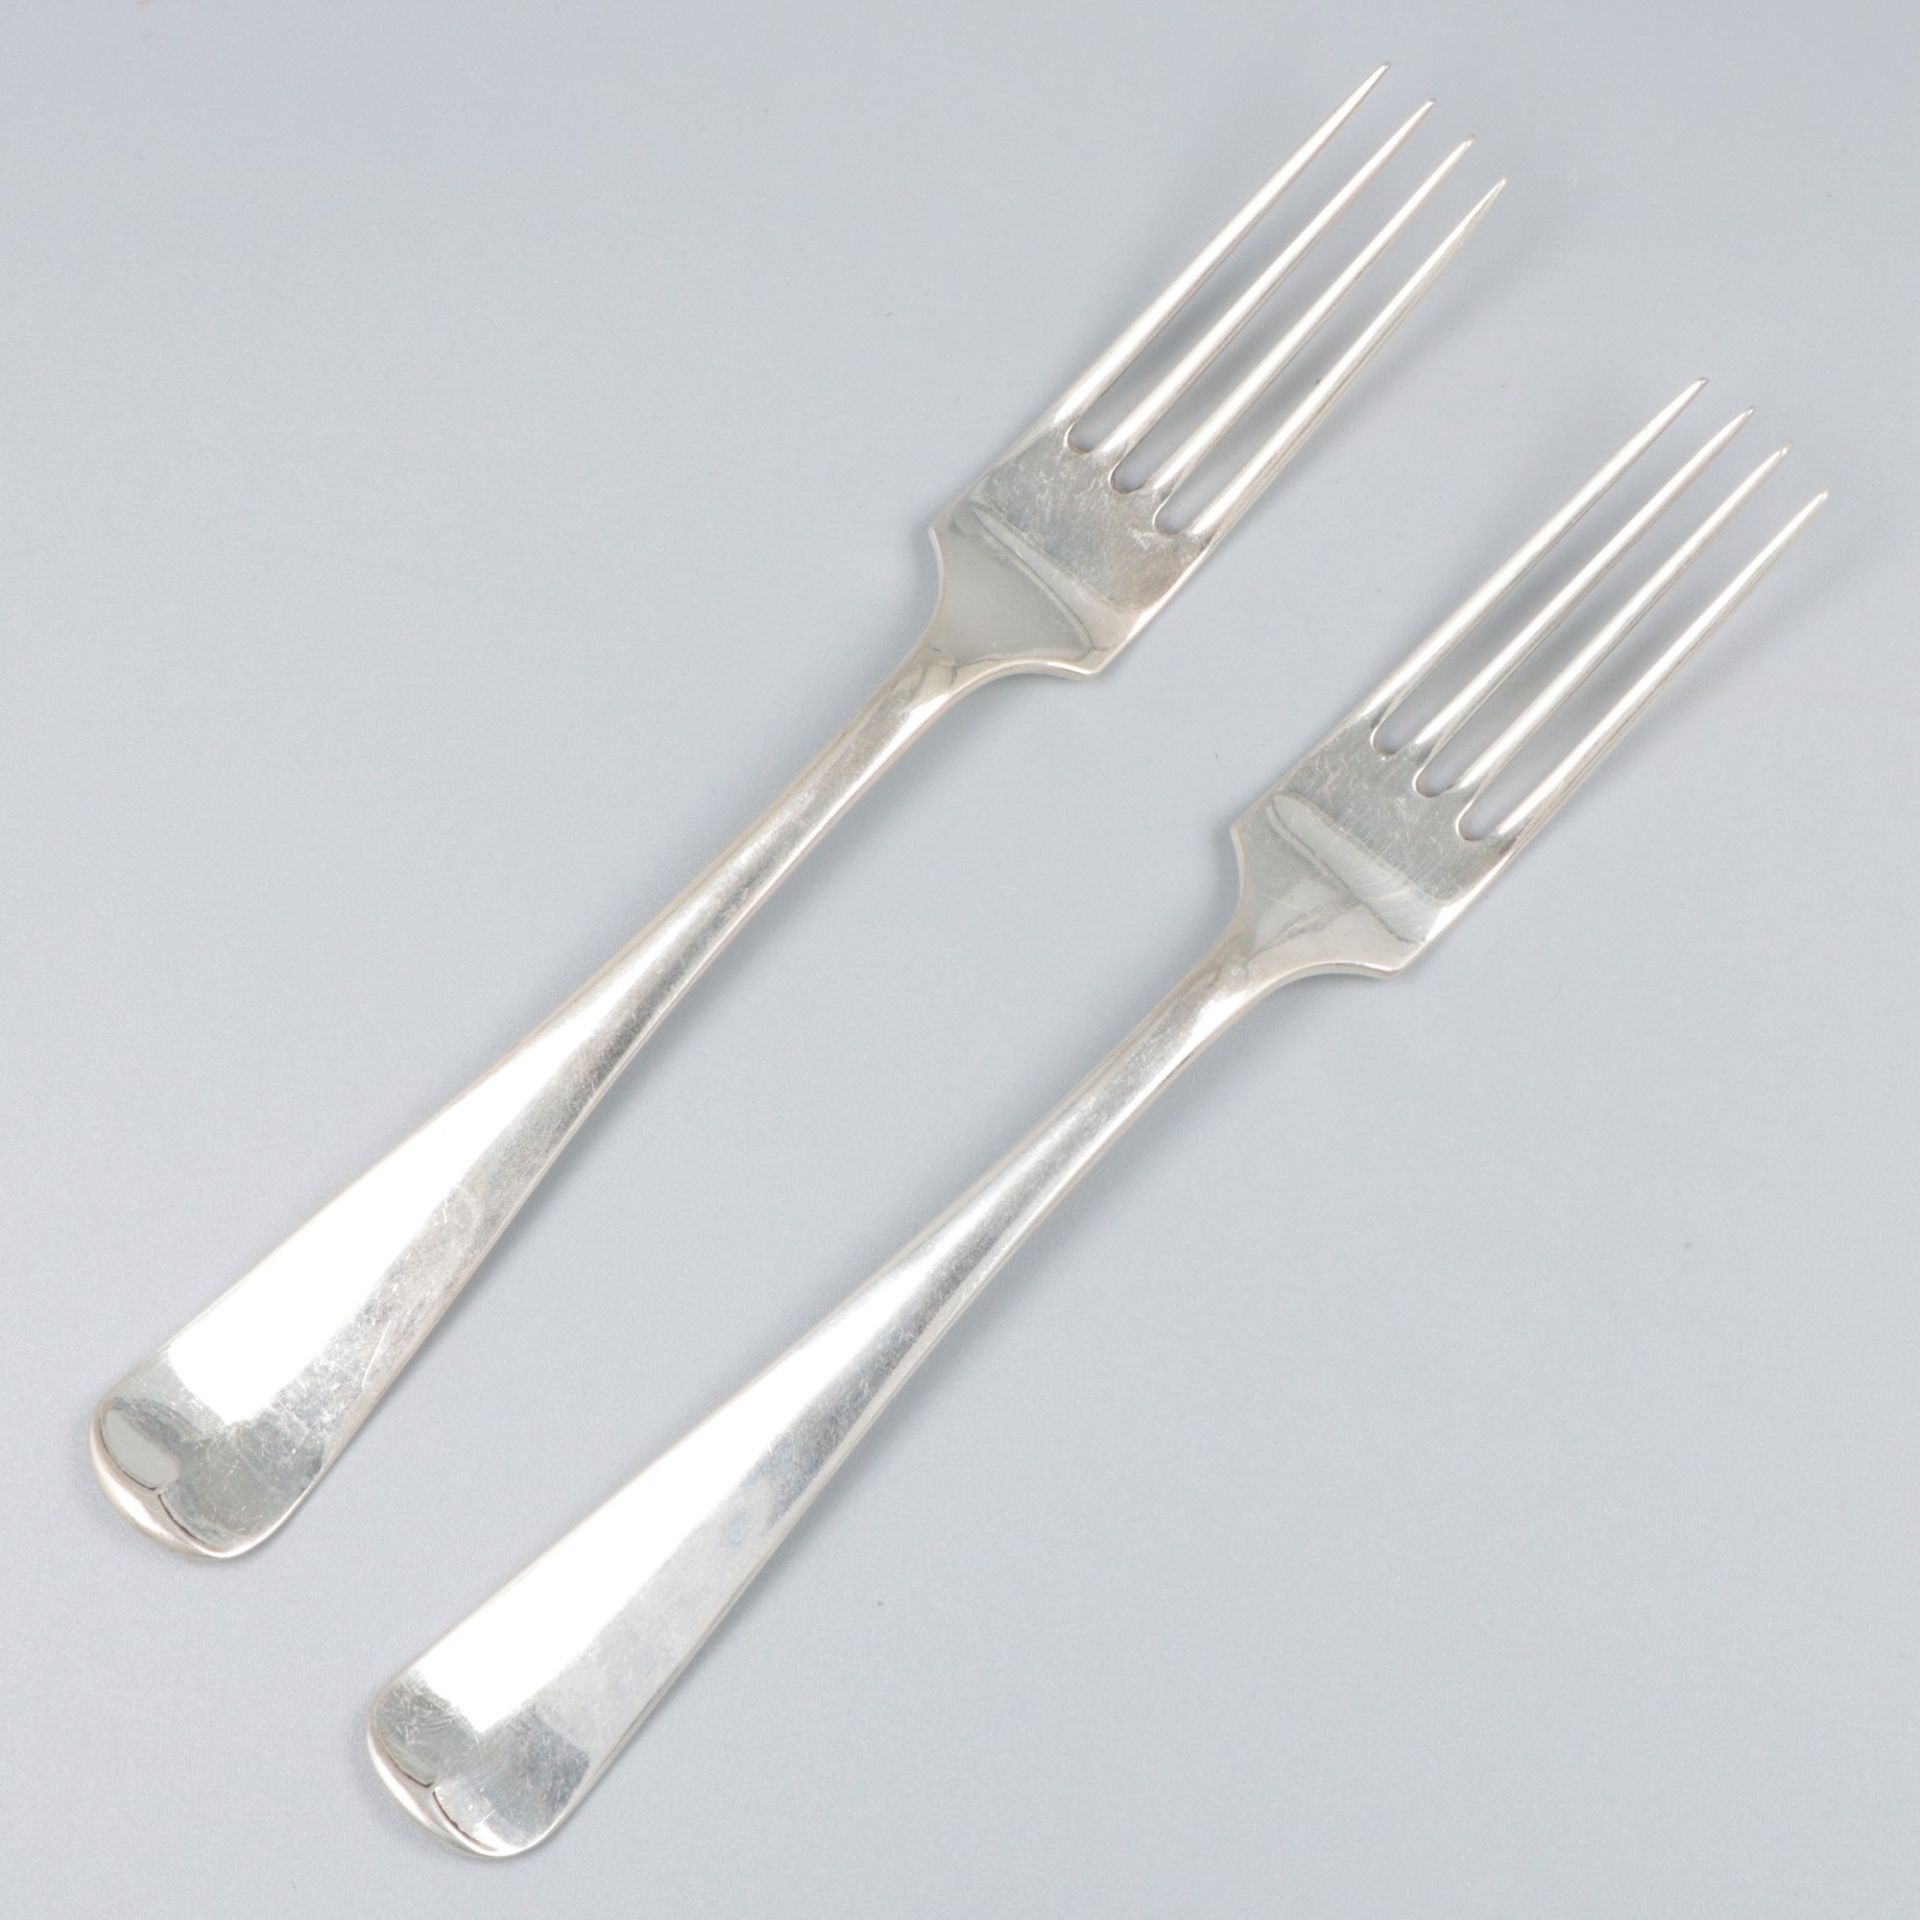 10-piece set of forks "Haags Lofje" silver. - Image 2 of 6